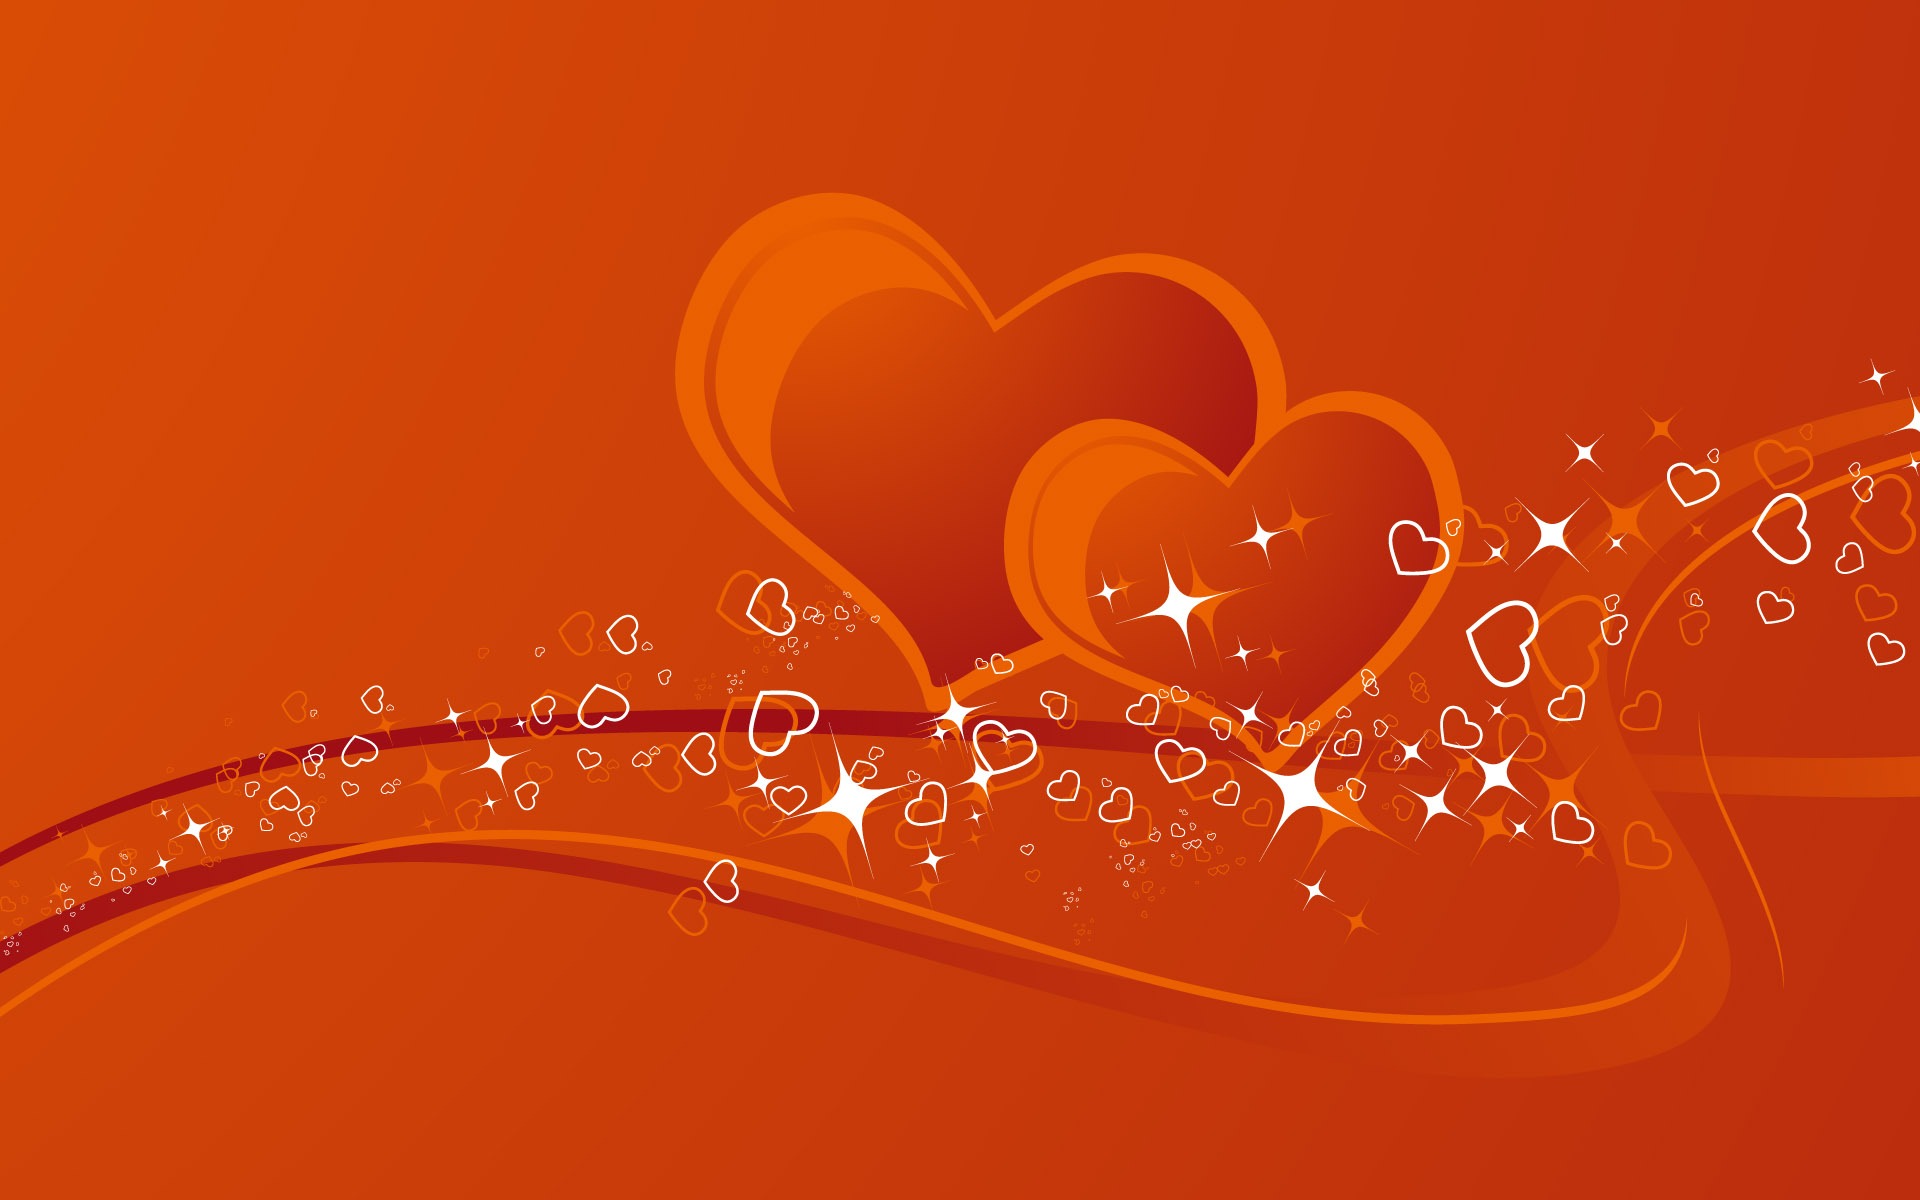 Valentine's Day Love Theme Wallpapers #25 - 1920x1200